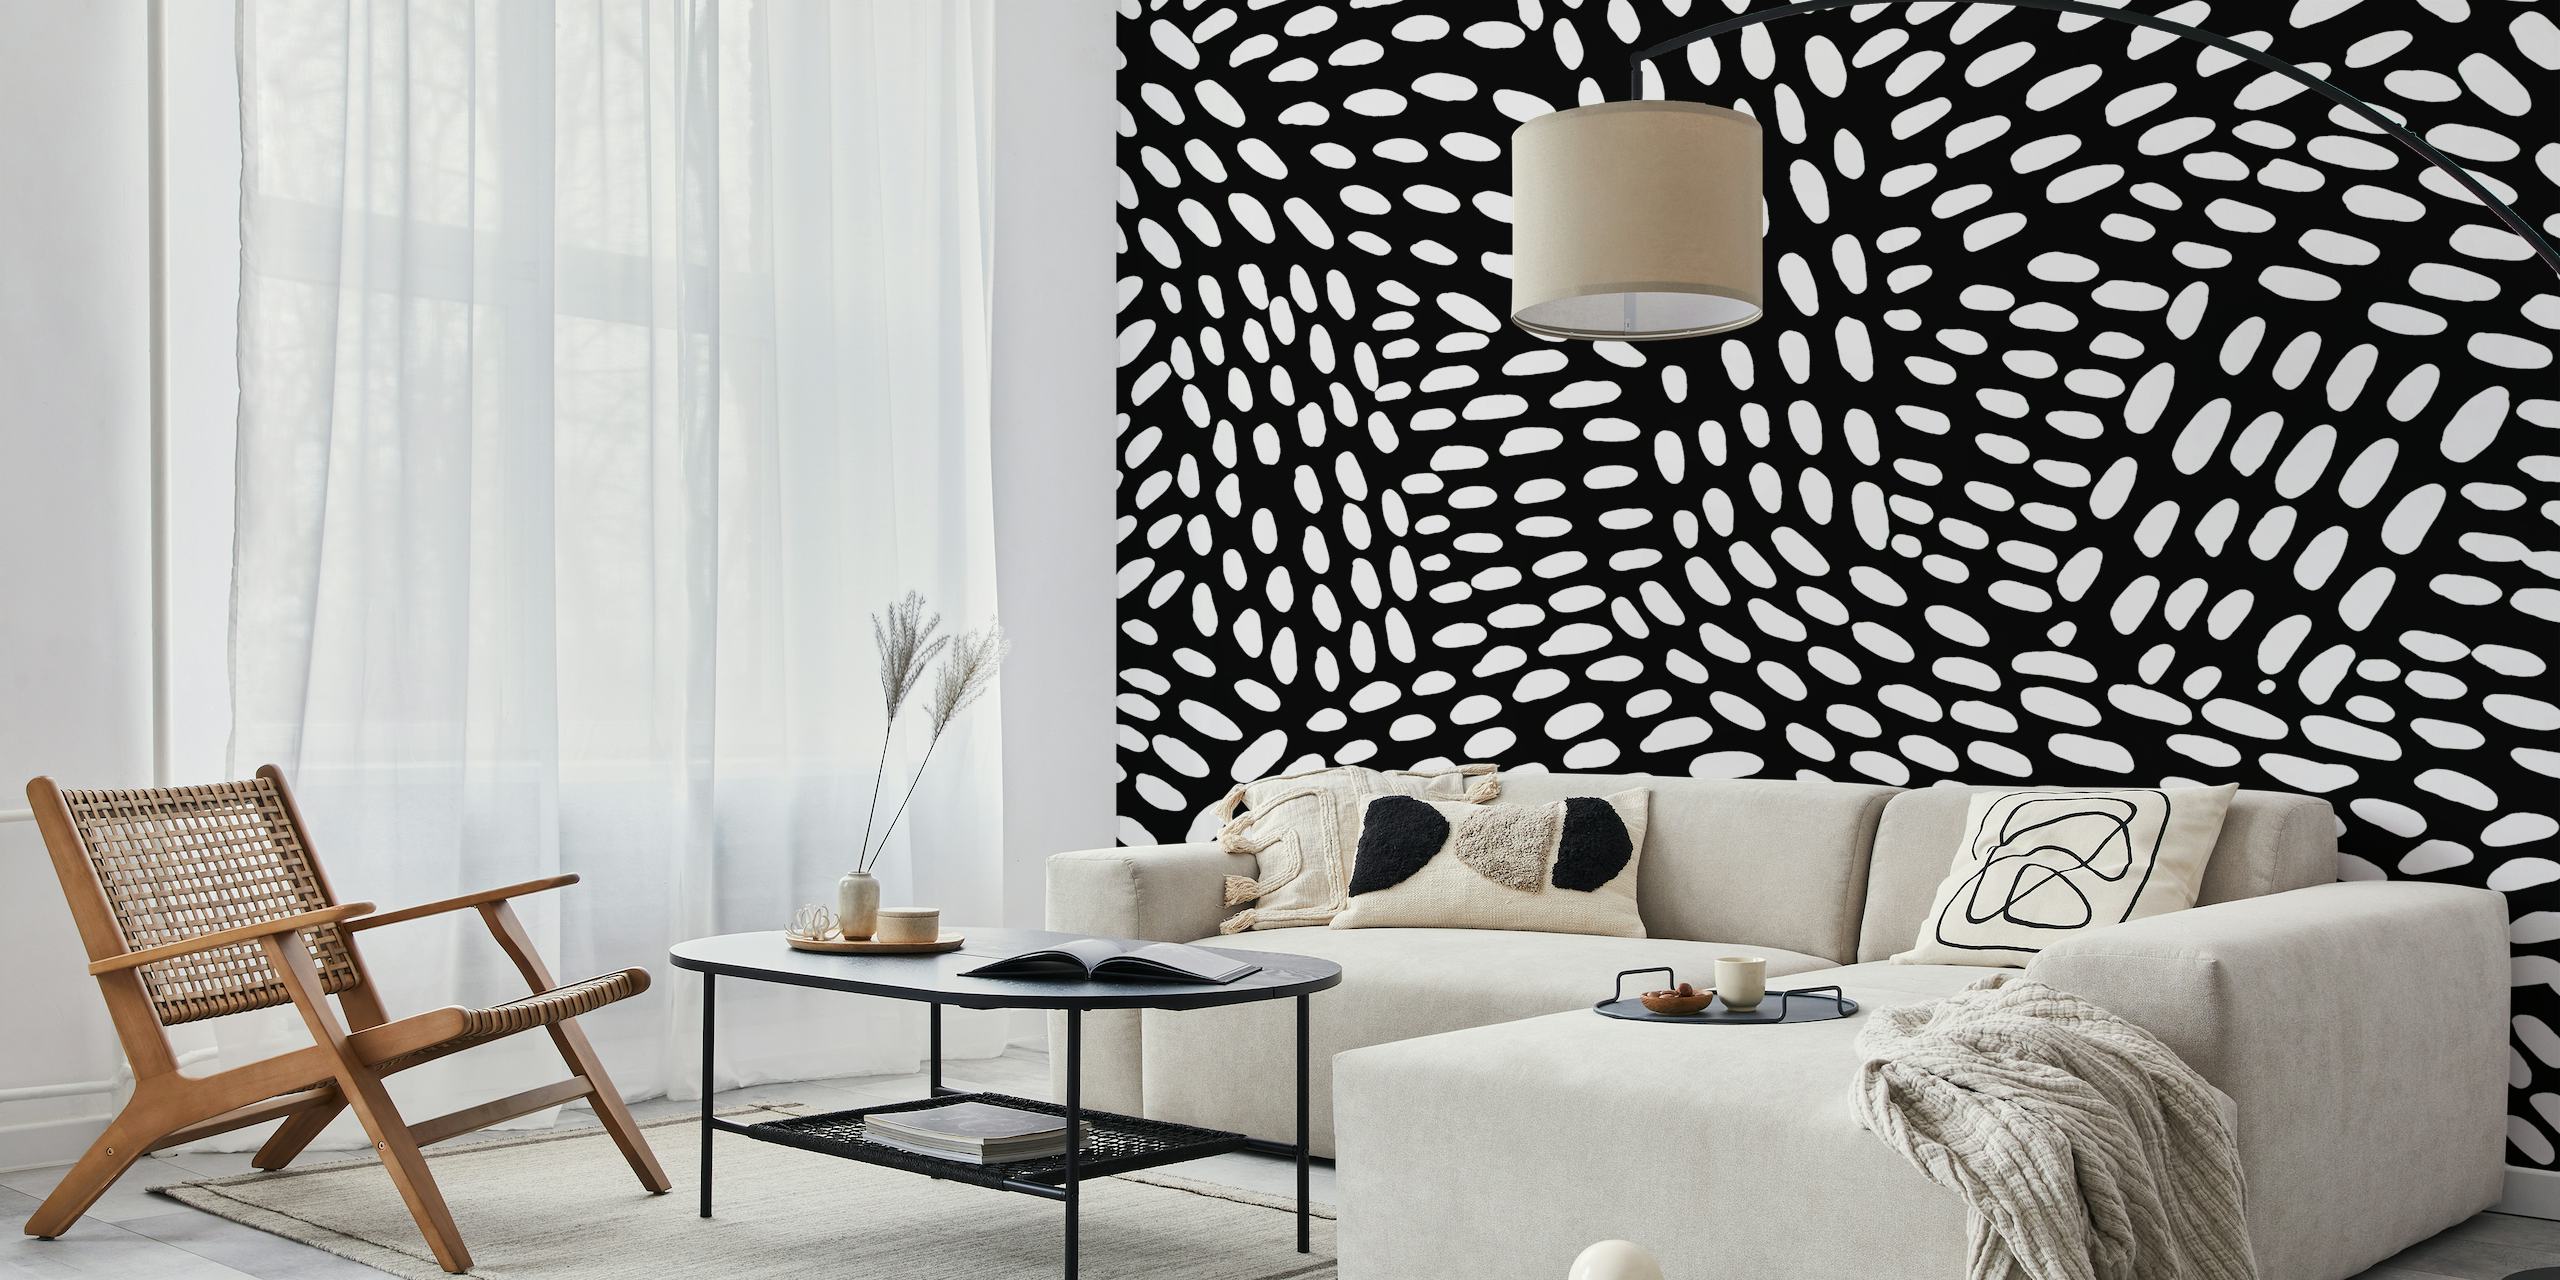 Abstract black and white dotted line pattern wall mural